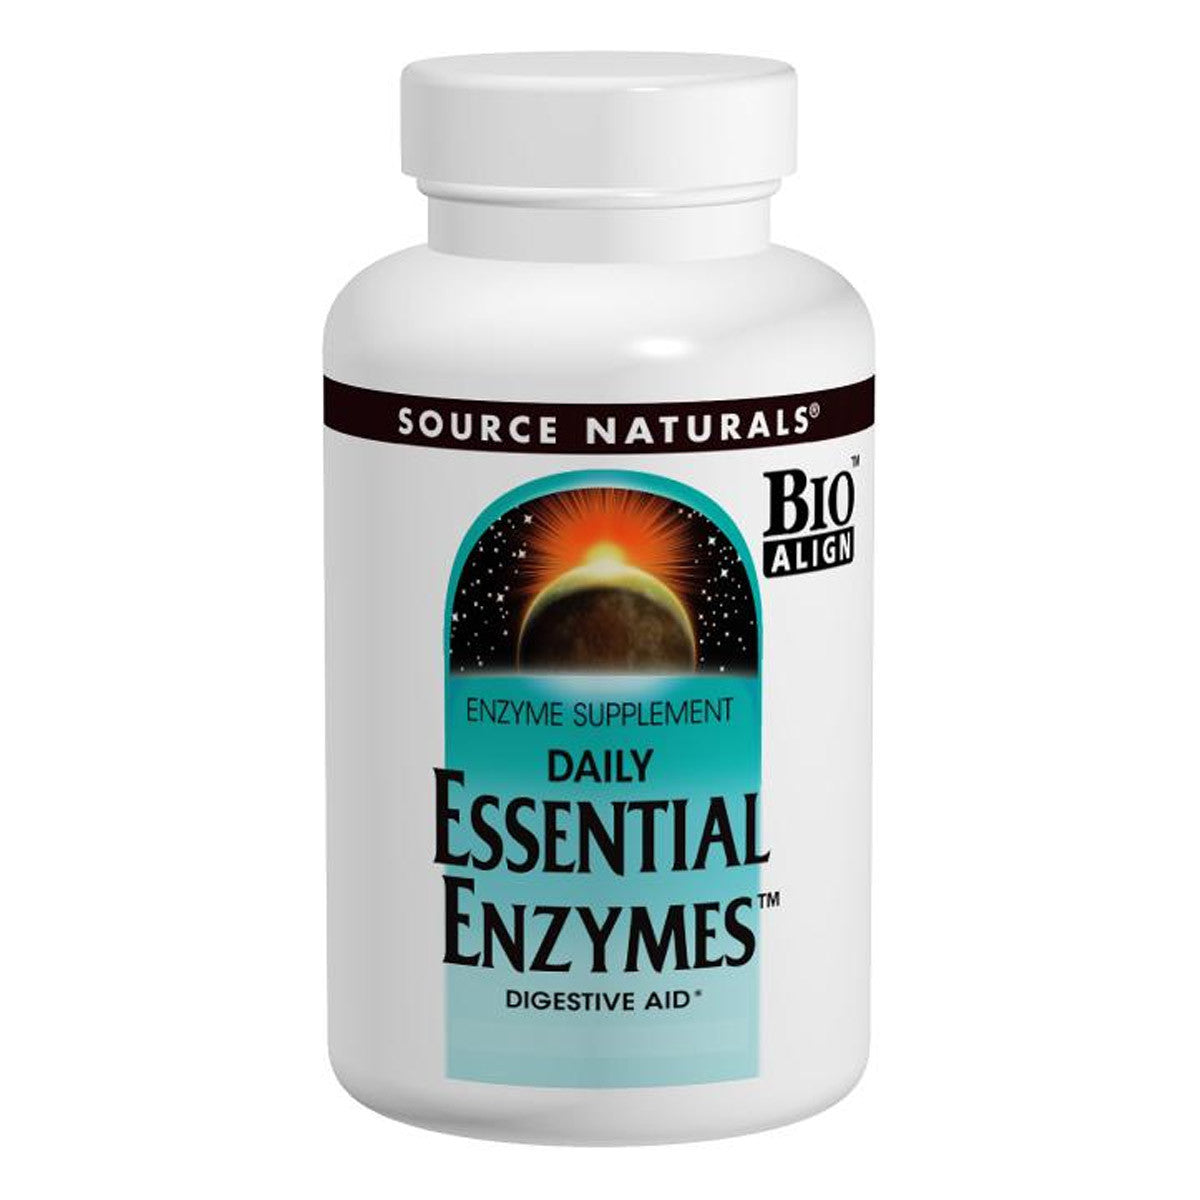 Primary image of Essential Enzymes 500mg